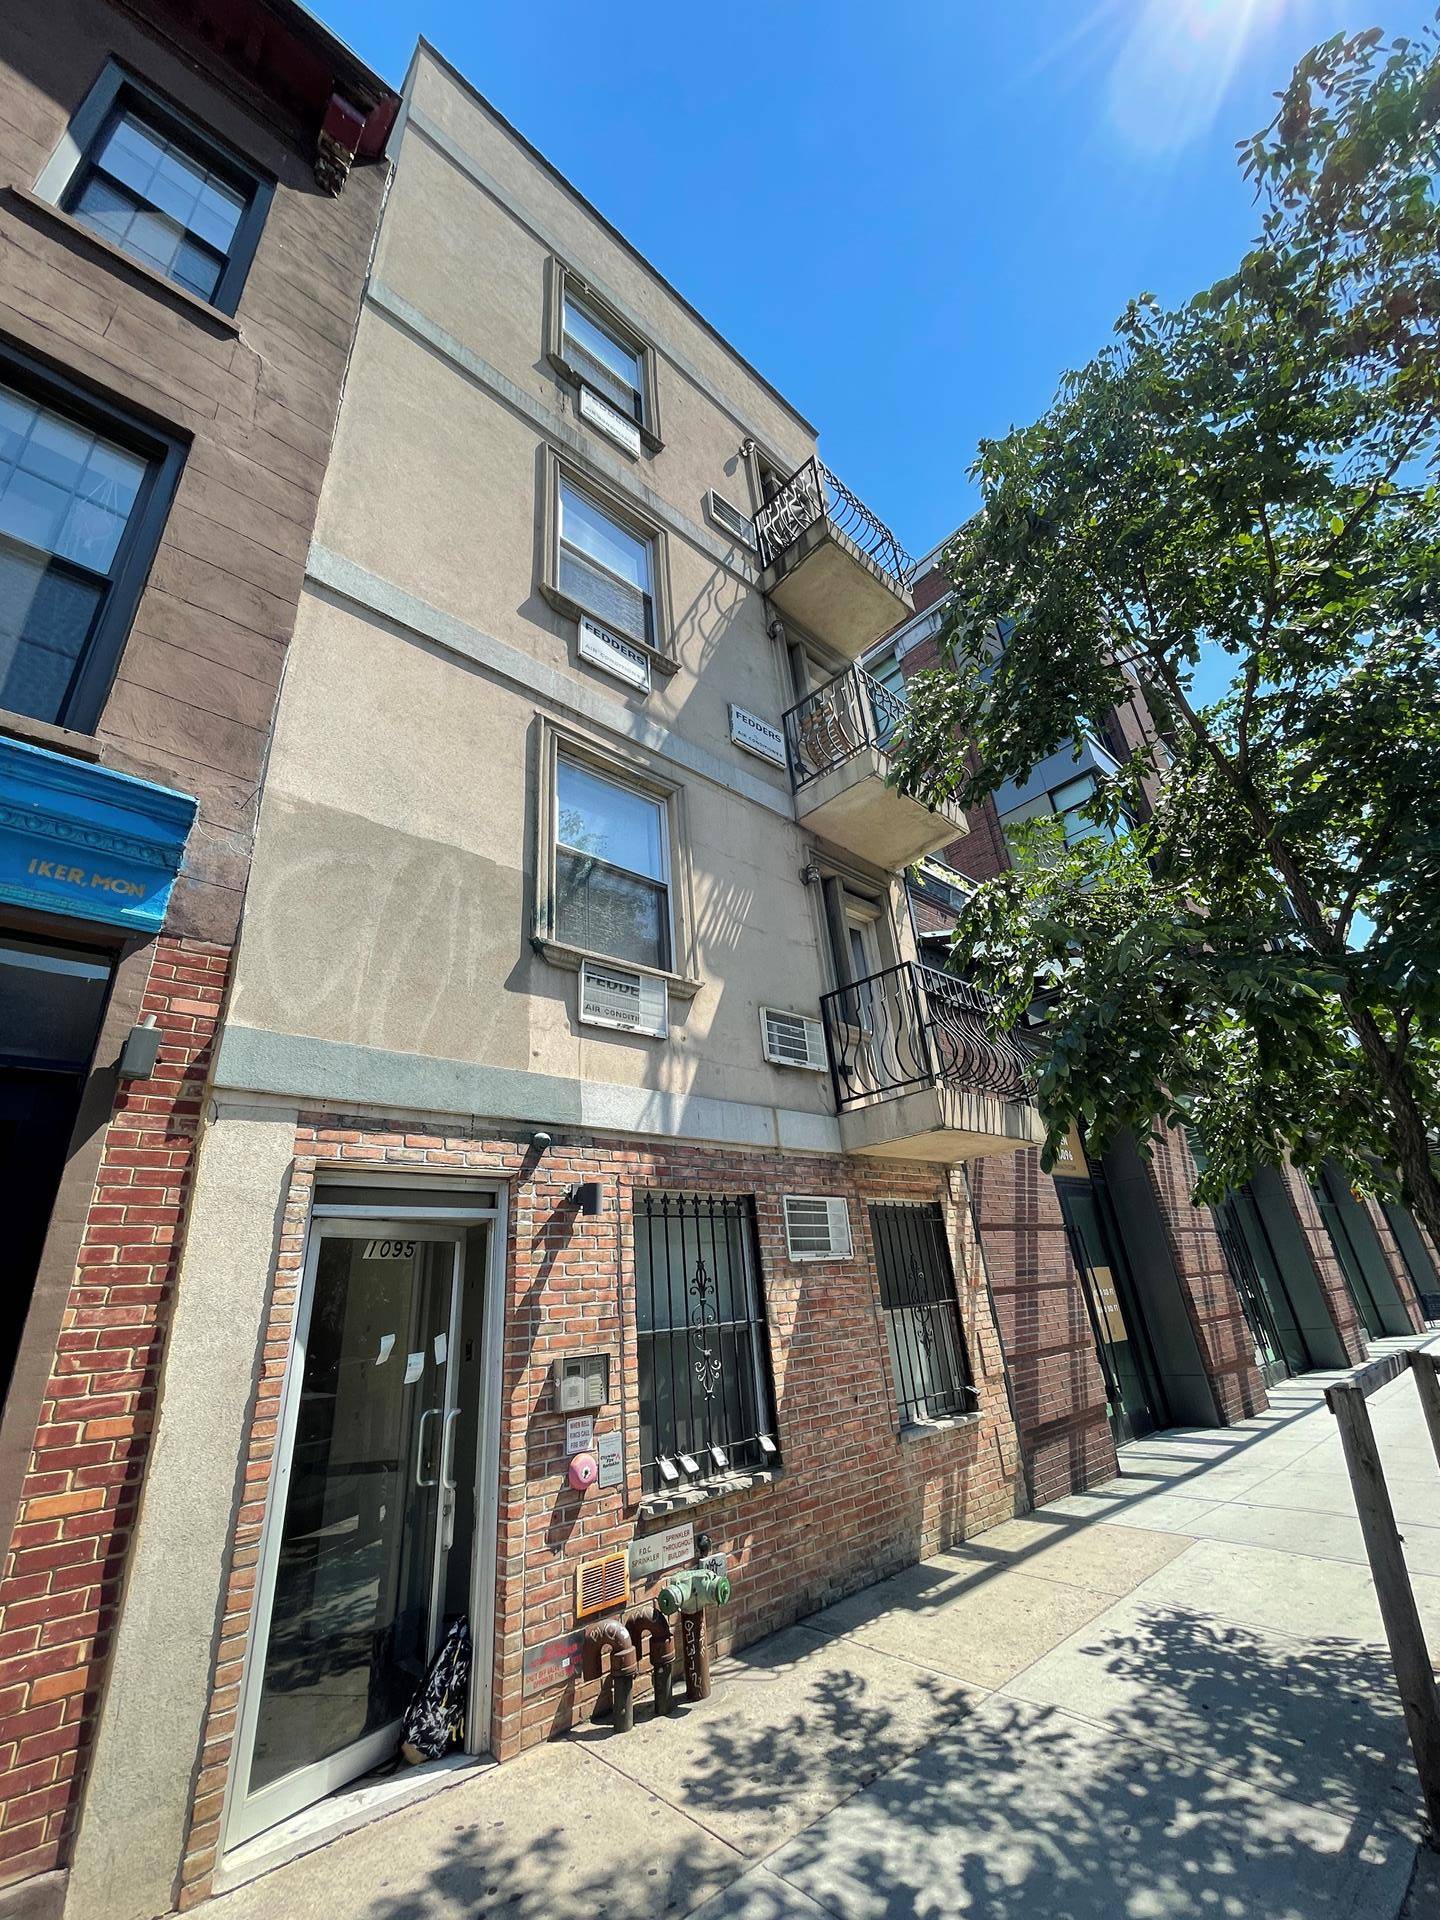 We are proud to present, an eight unit multifamily walk up apartment building located in the Bedford Stuyvesant neighborhood of Brooklyn.